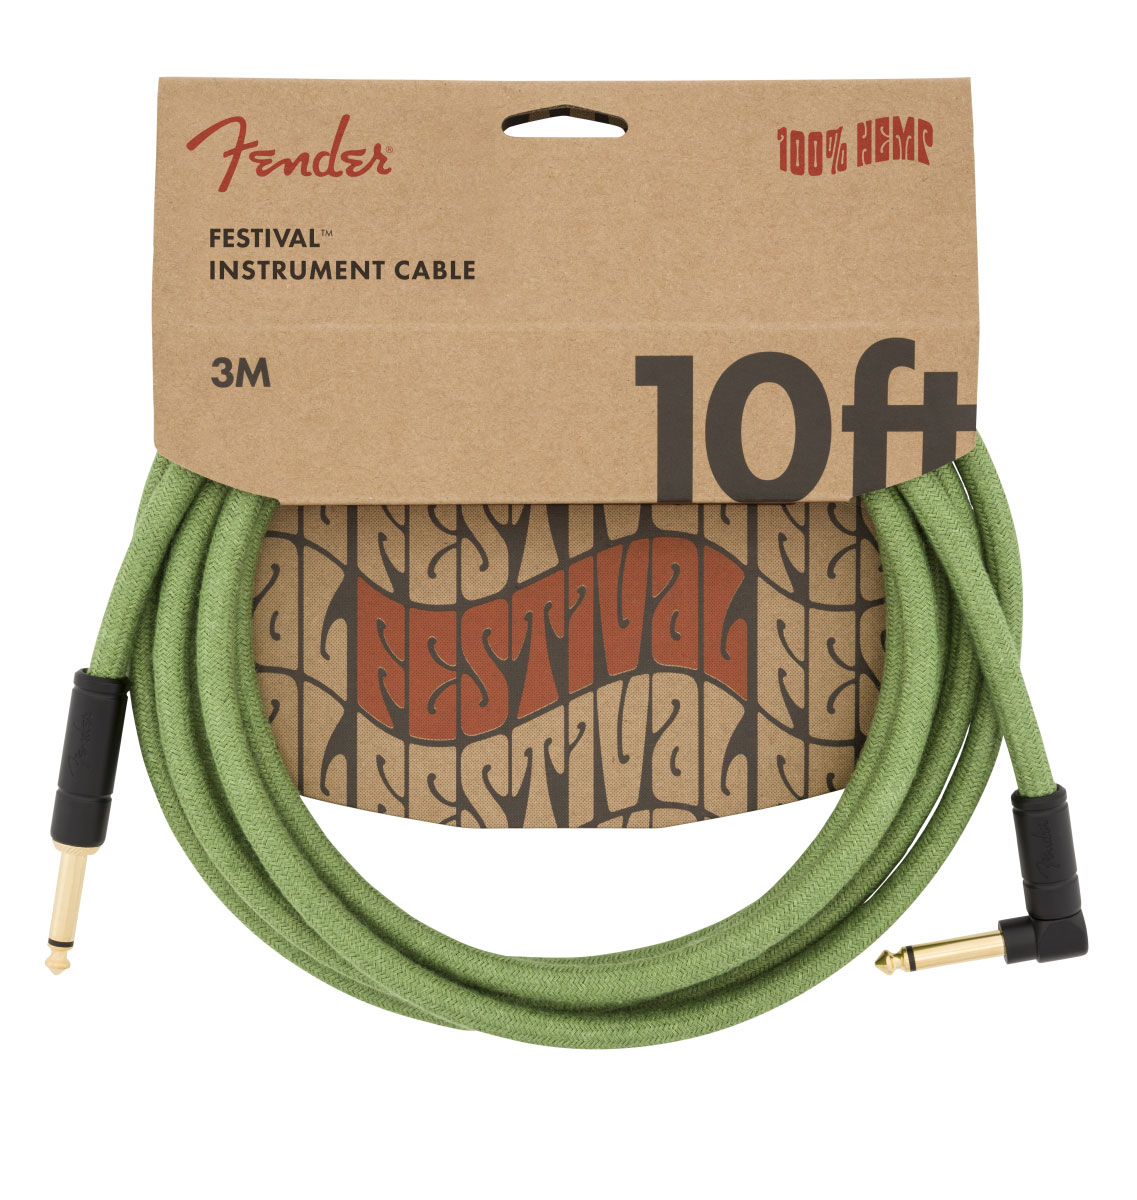 FENDER 10' ANGLED FESTIVAL INSTRUMENT CABLE, PURE HEMP, GREEN